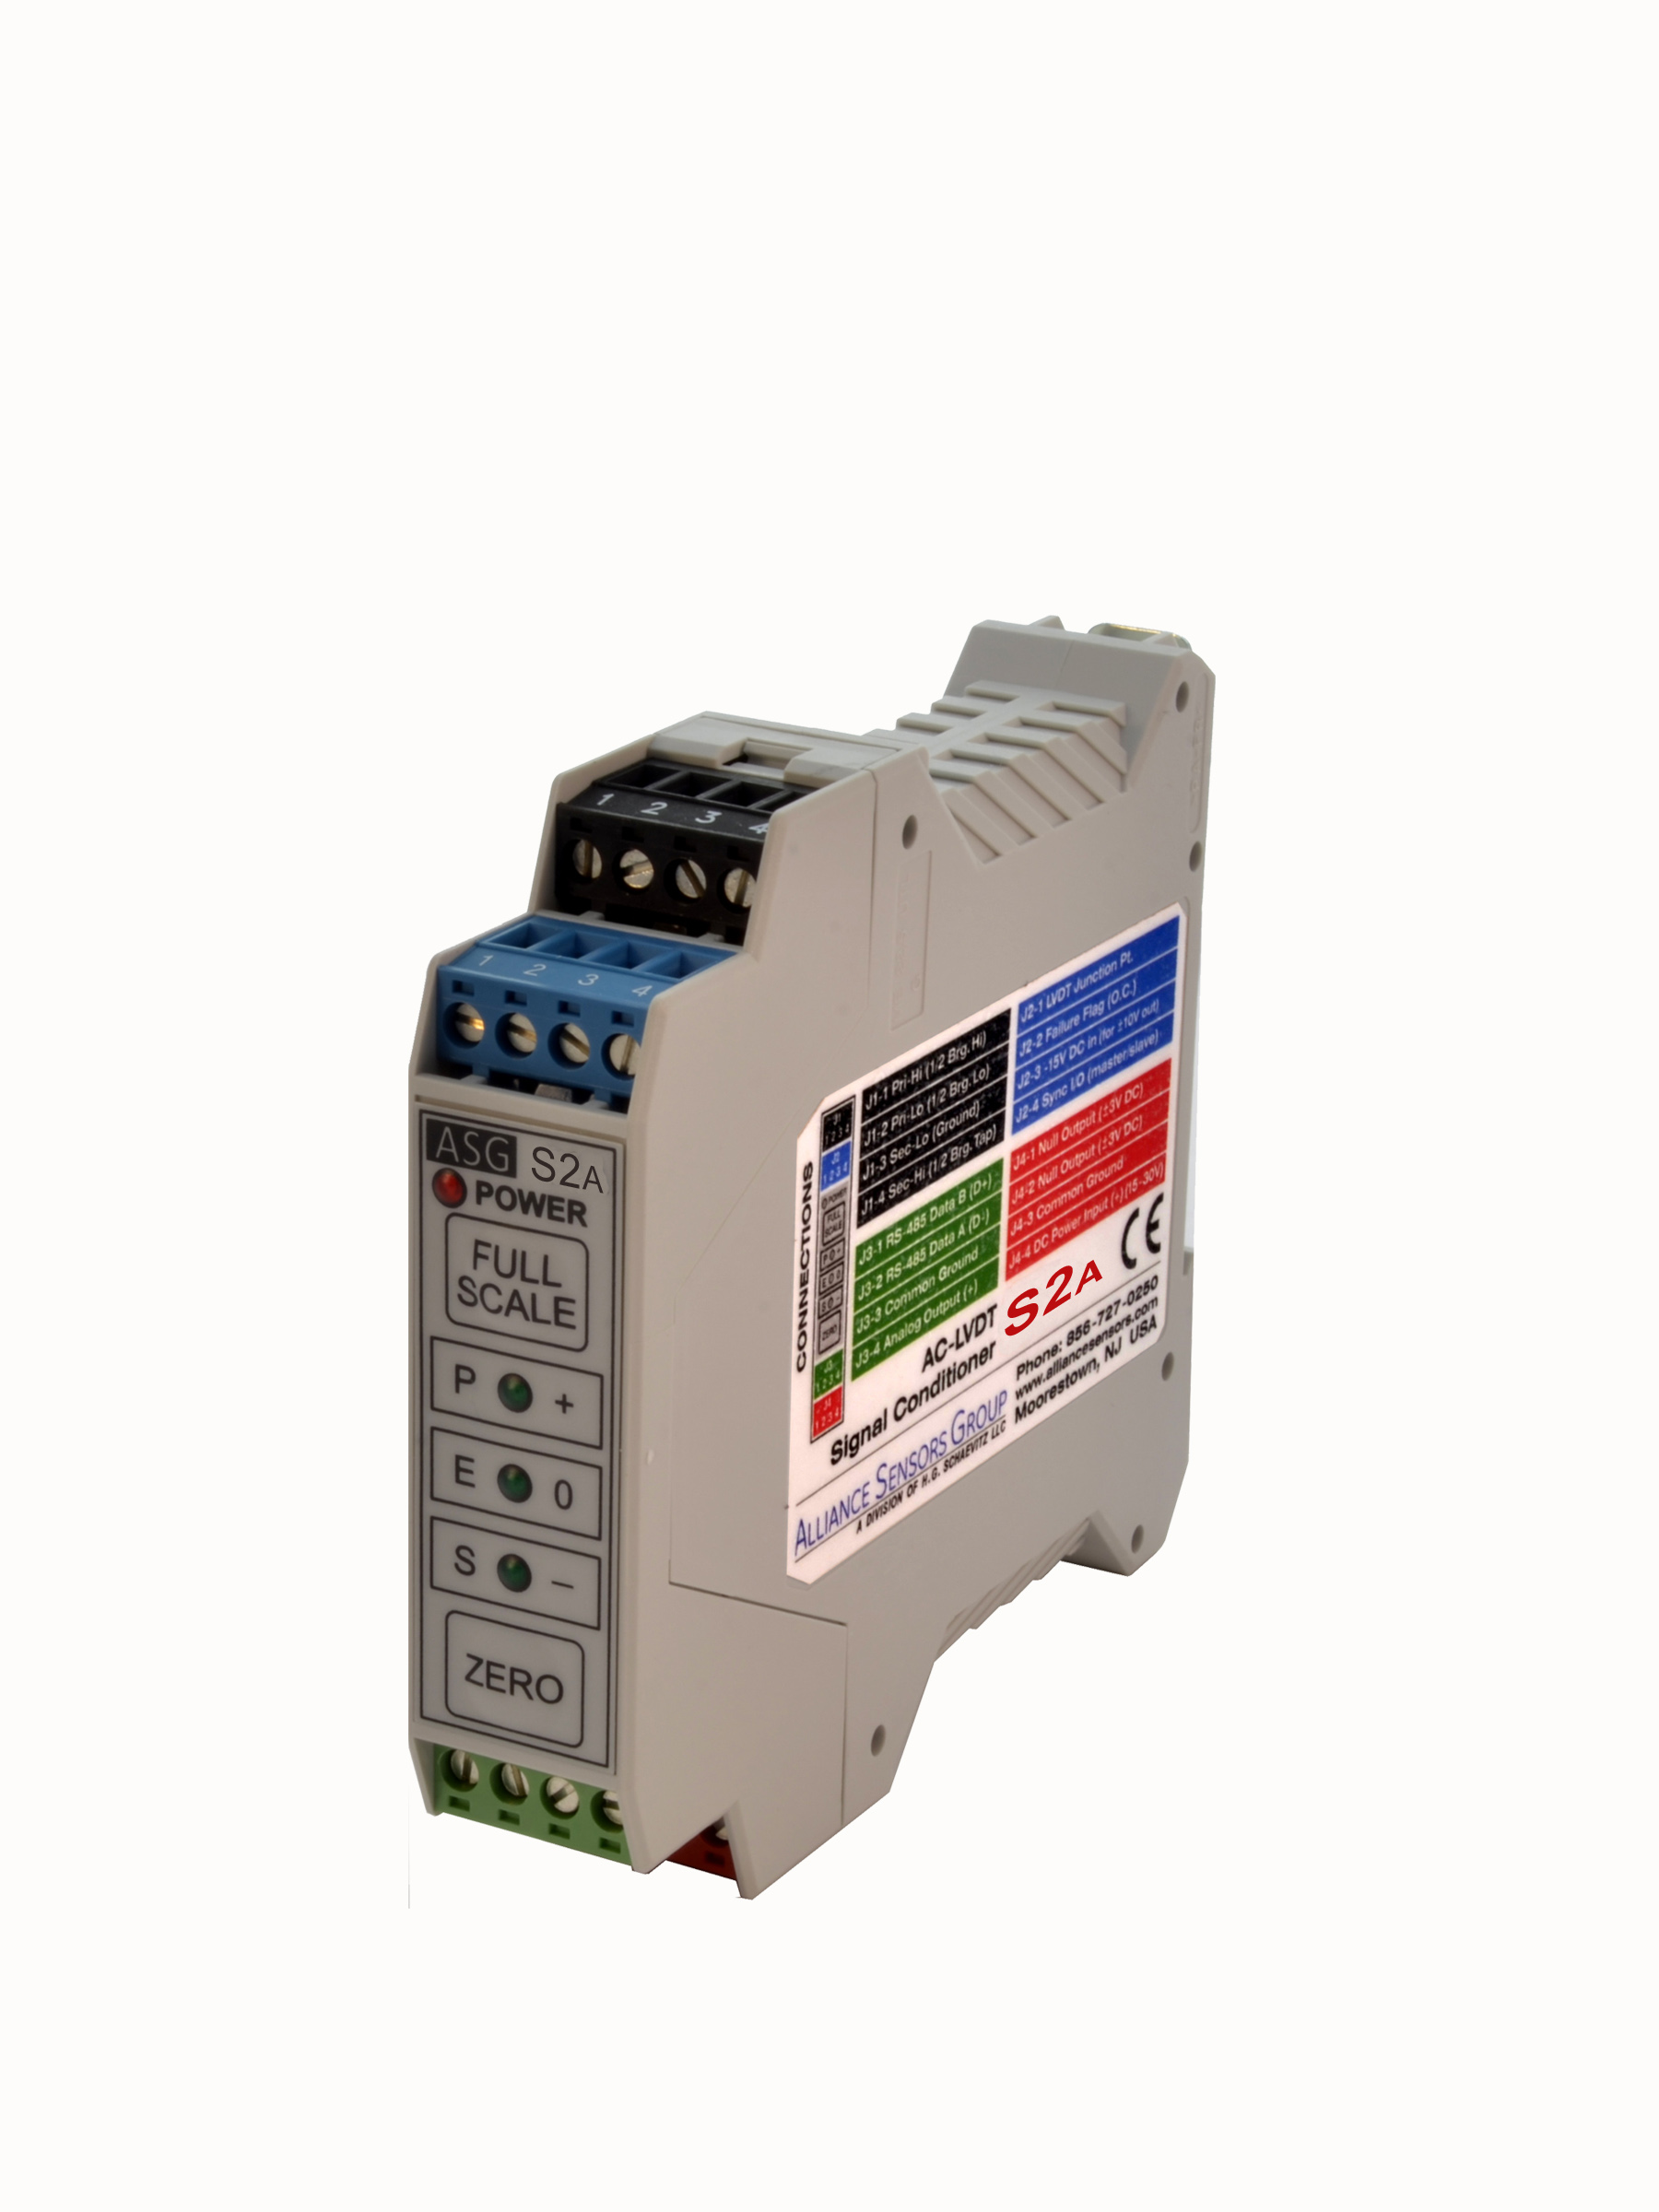 Alliance Sensors Groups S2A and SC-200 DIN-rail-mounted push-button-calibrated LVDT signal conditioners